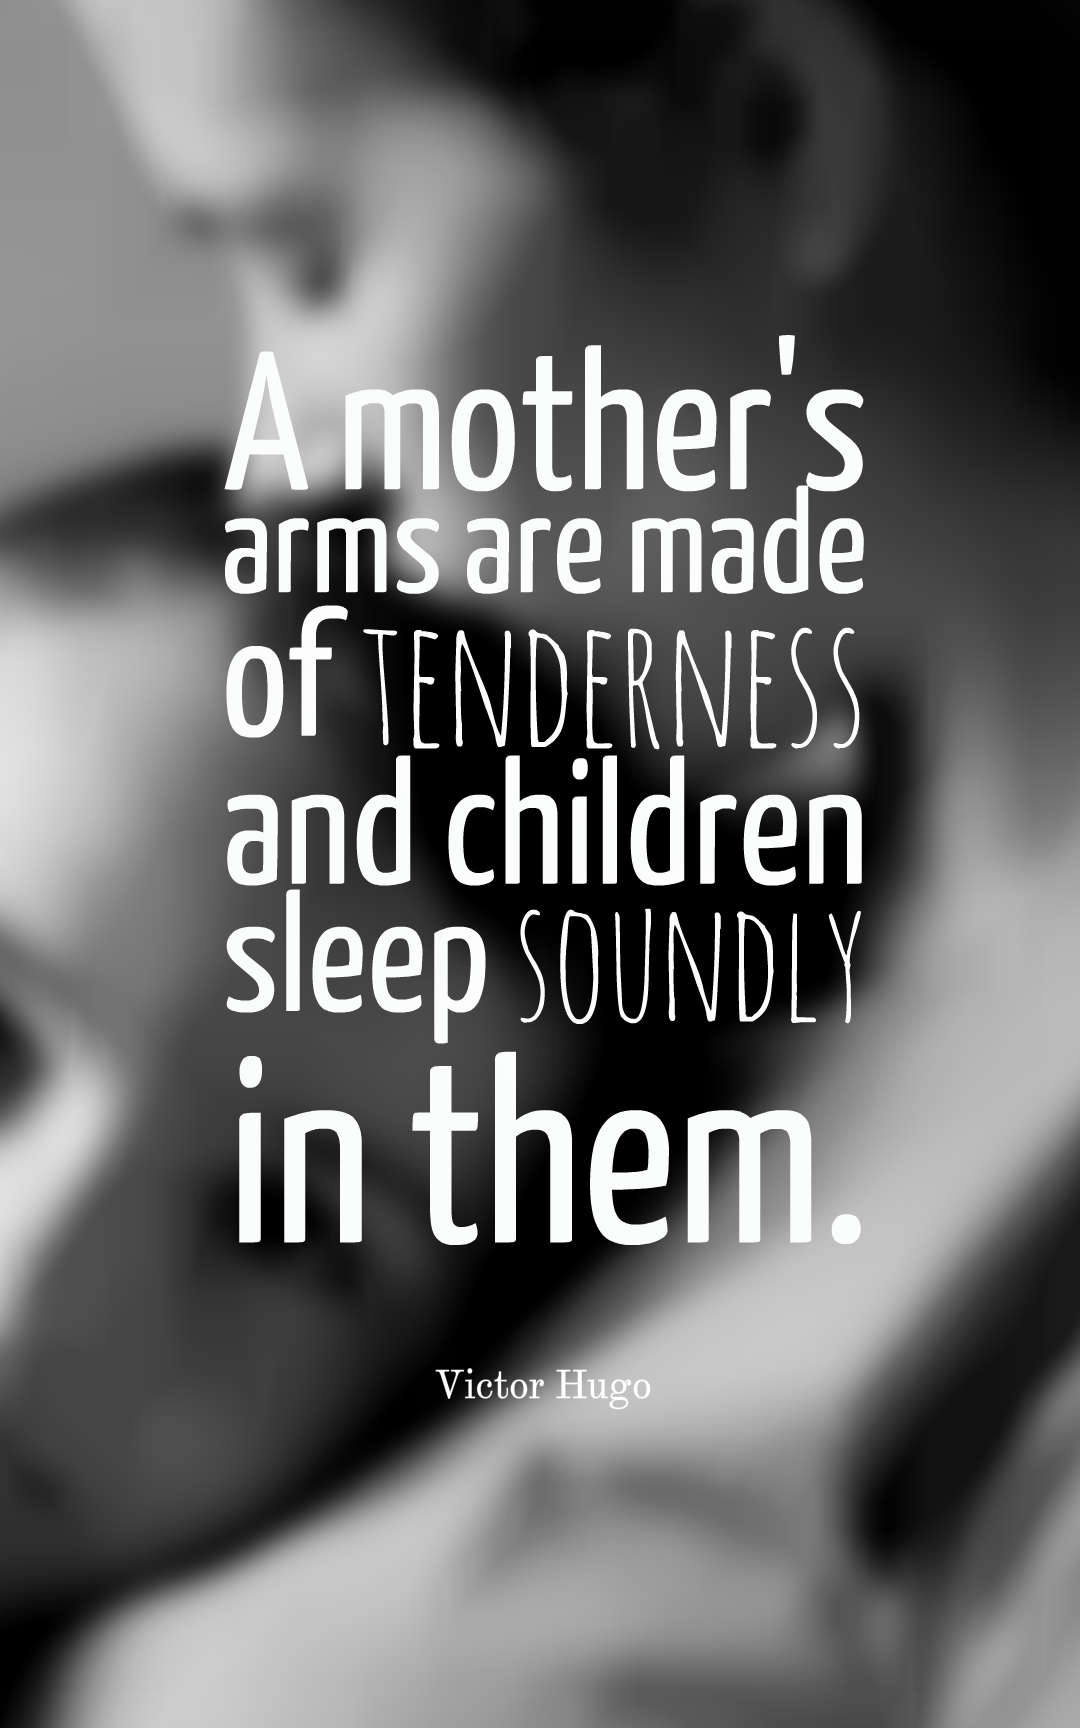 A mother's arms are made of tenderness and children sleep soundly in them.